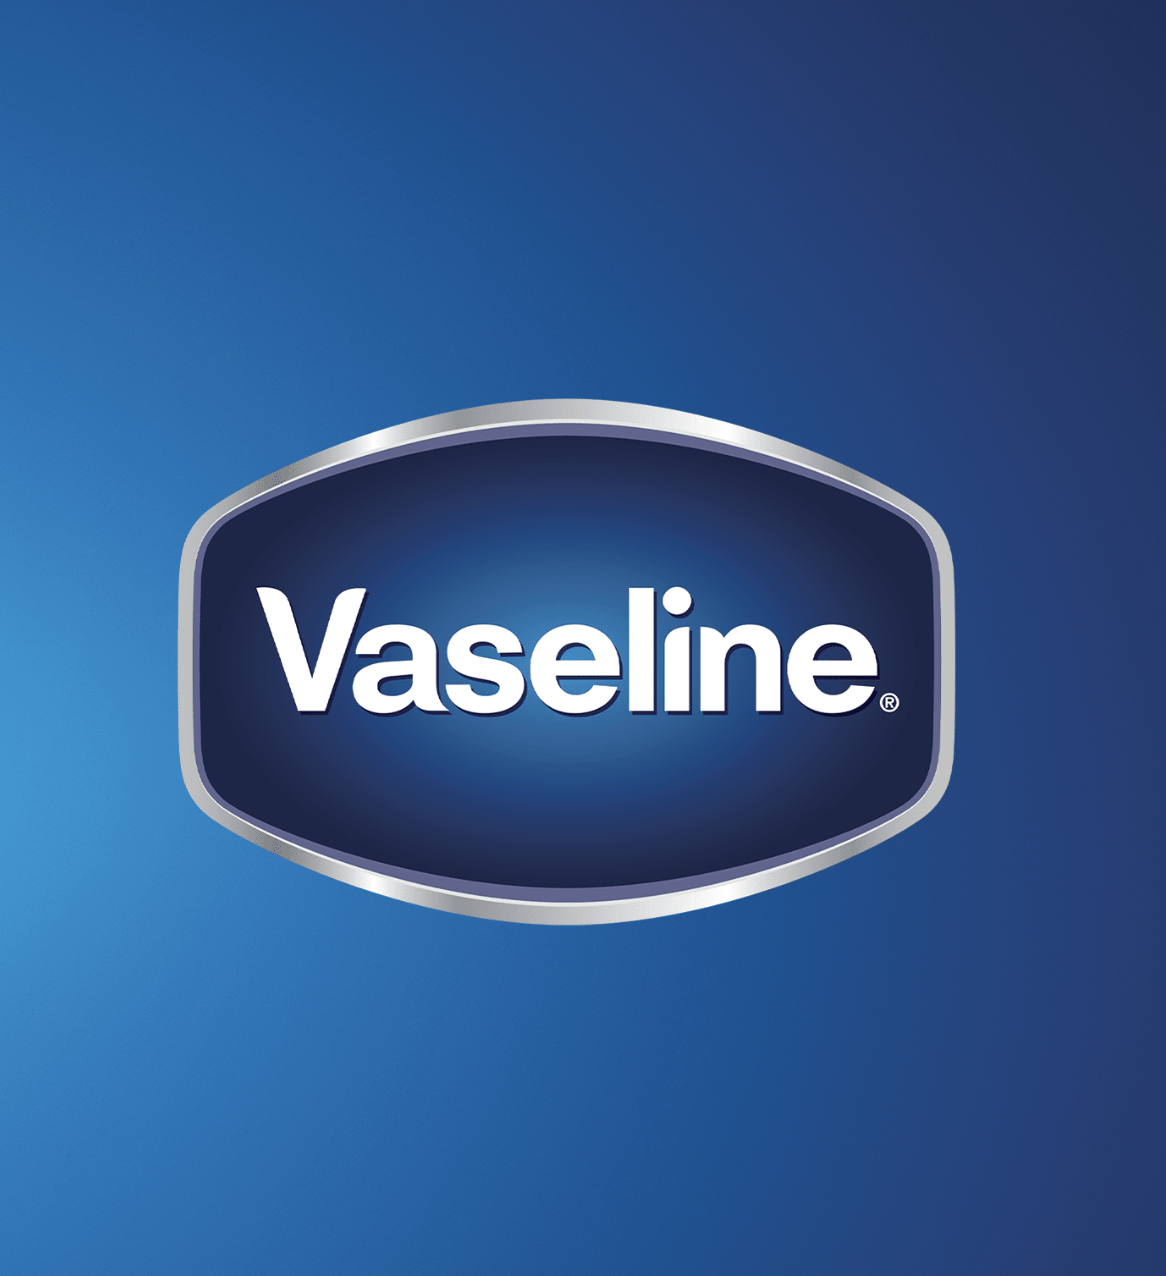 Vaseline Influencer Collaboration with Chacefit